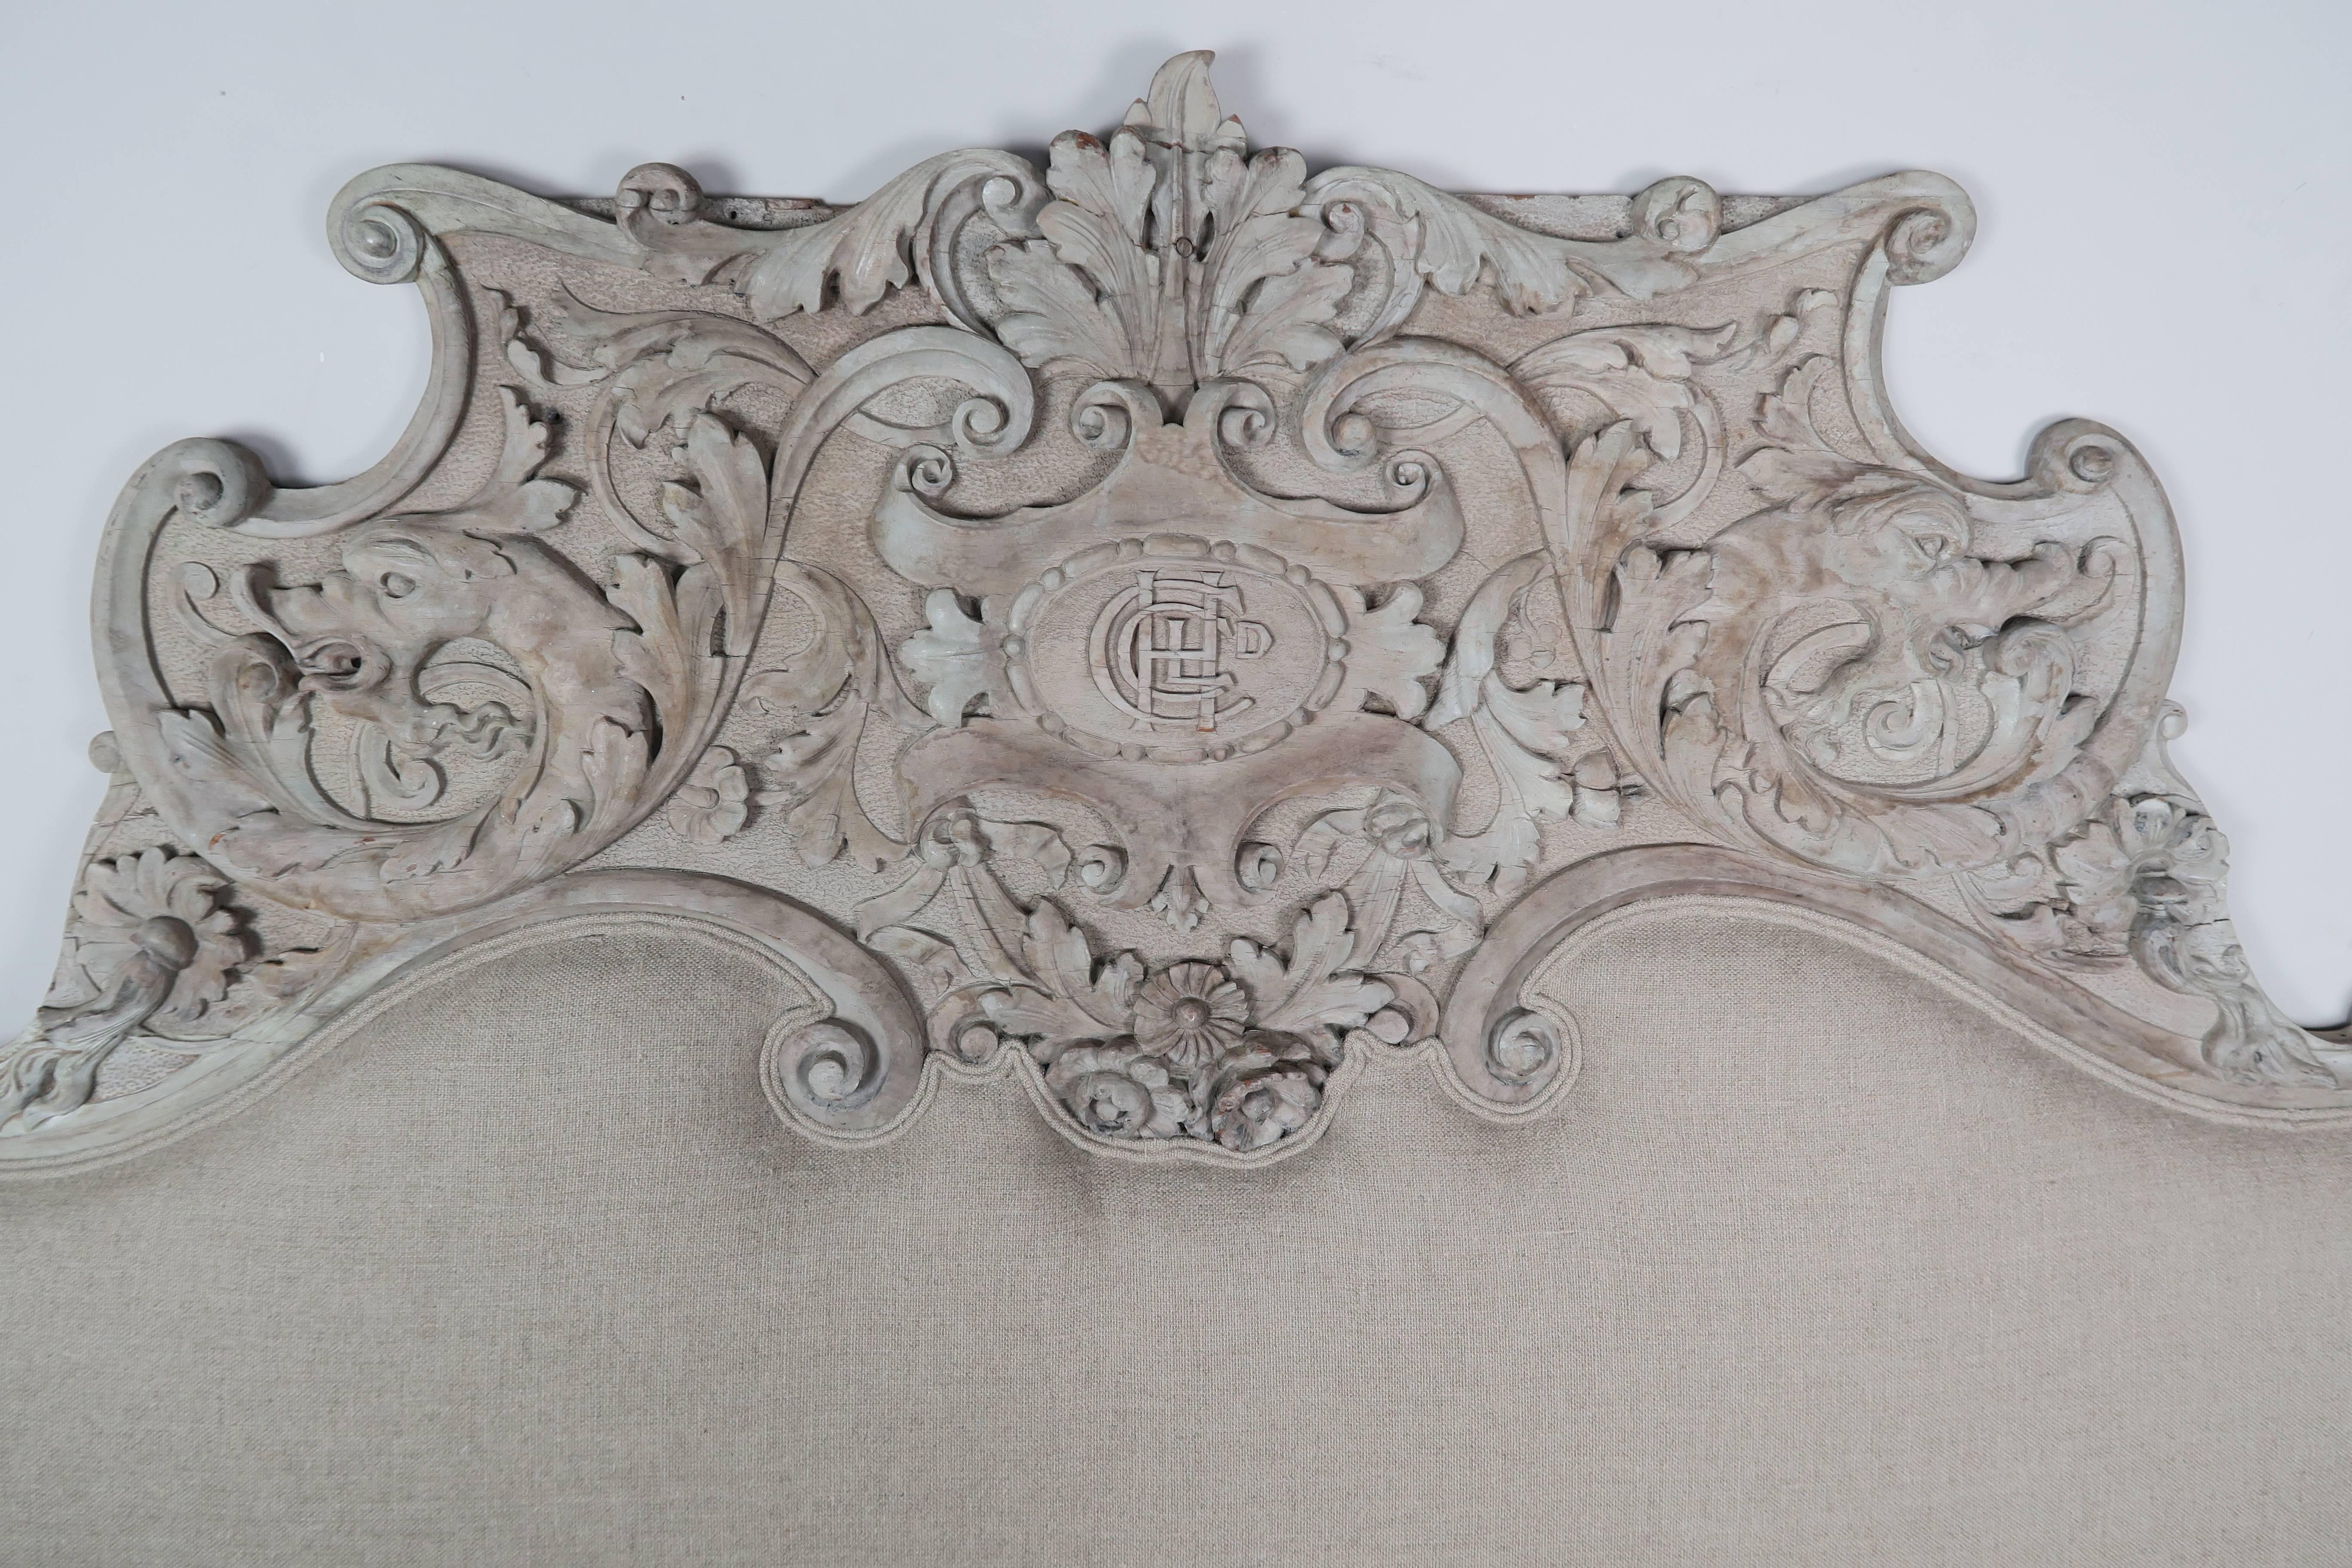 19th century, Italian carved Rococo carved headboard upholstered in a natural washed Belgium linen. The carving has dolphins and swirling acanthus leaves with a center monogrammed cartouche. Accommodates a king size mattress.